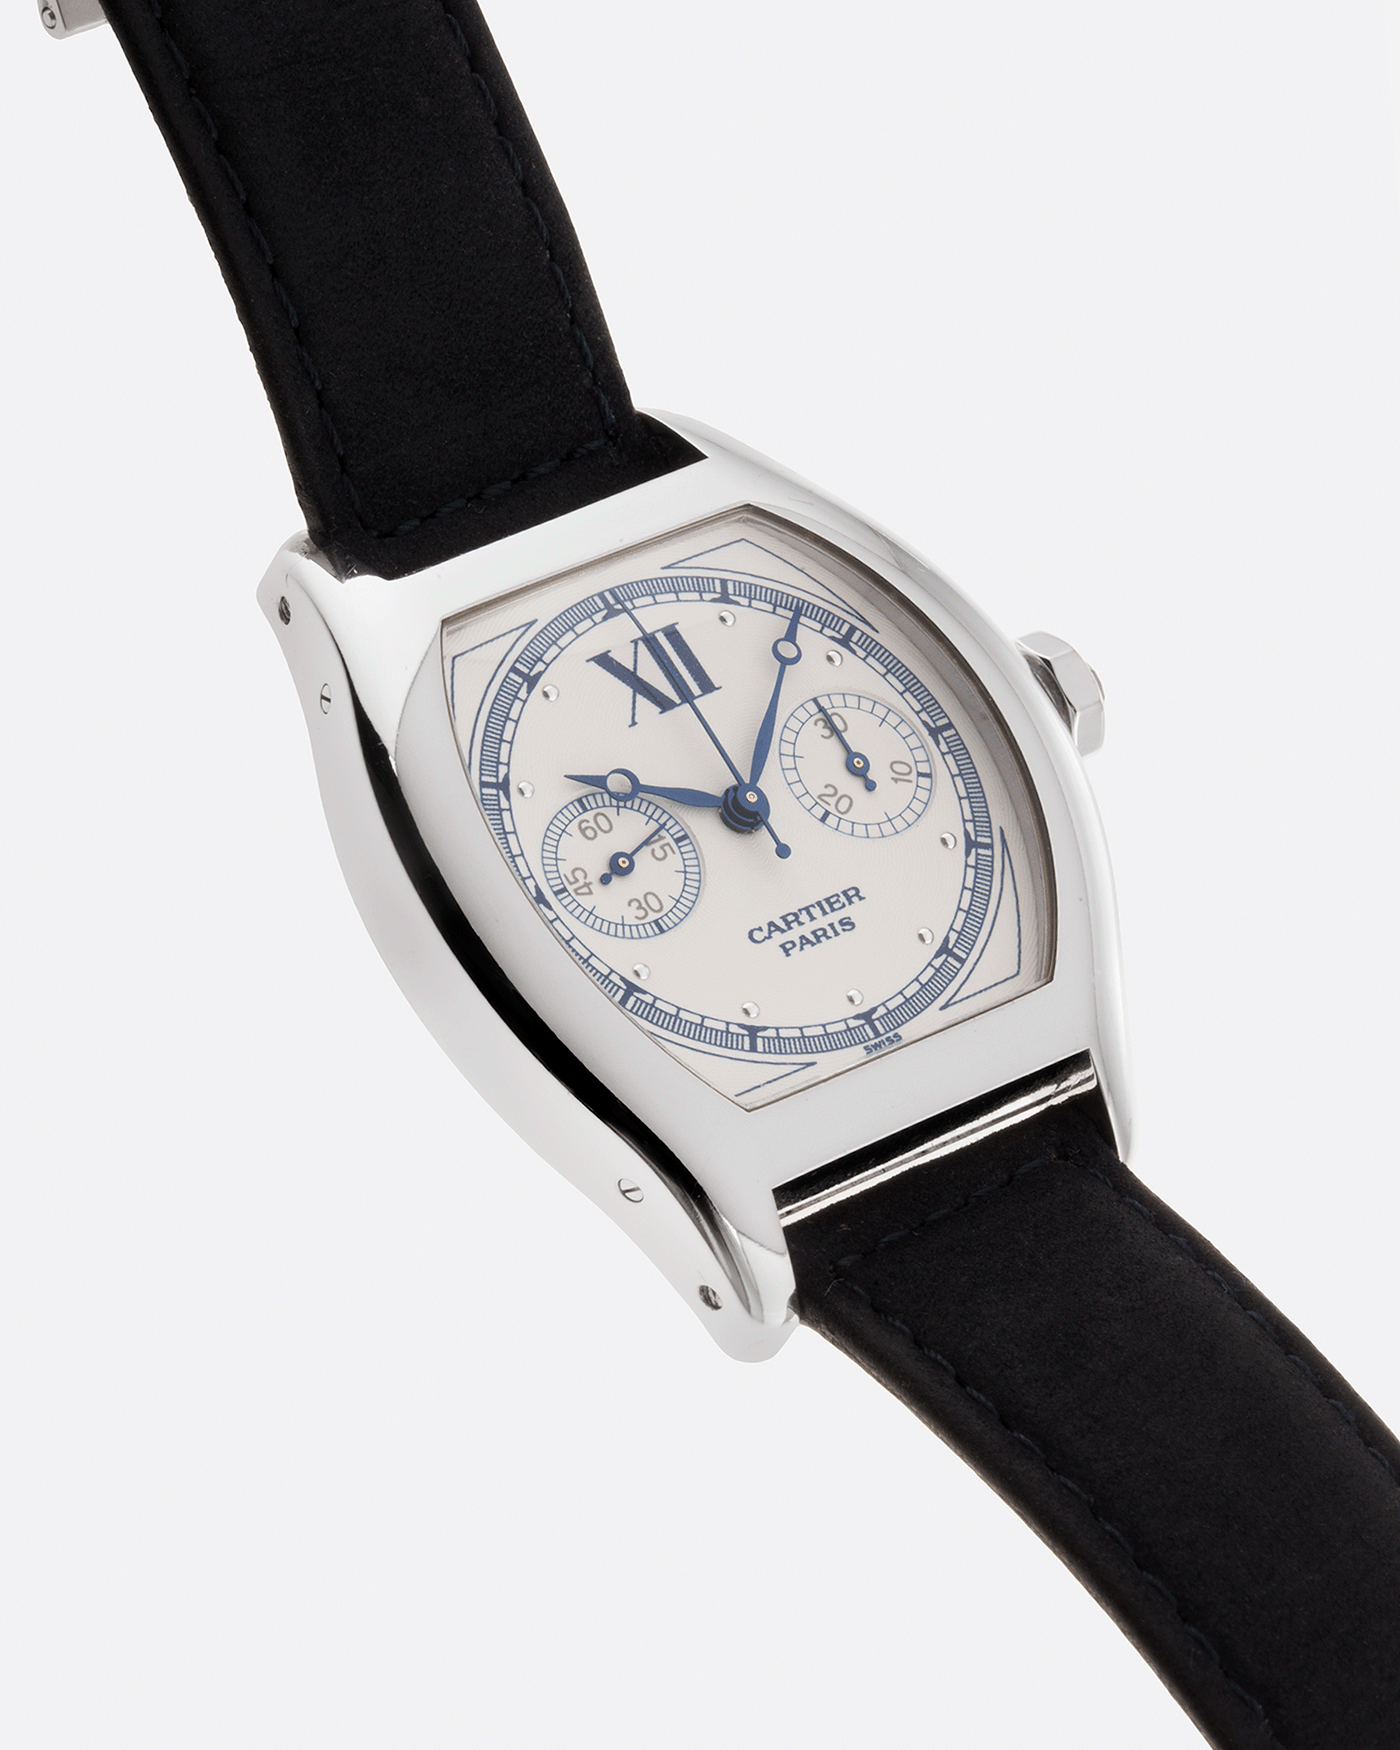 Brand: Cartier Year: 2000’s Model: CPCP Collection Prive Tortue Monopoussoir Reference: 2356 Material: 18k White Gold Movement: THA Cal. 045MC Case Diameter: 43 x 35 mm Strap: Navy Blue Suede Calf Strap with separate 18k Cartier White Gold Deployant